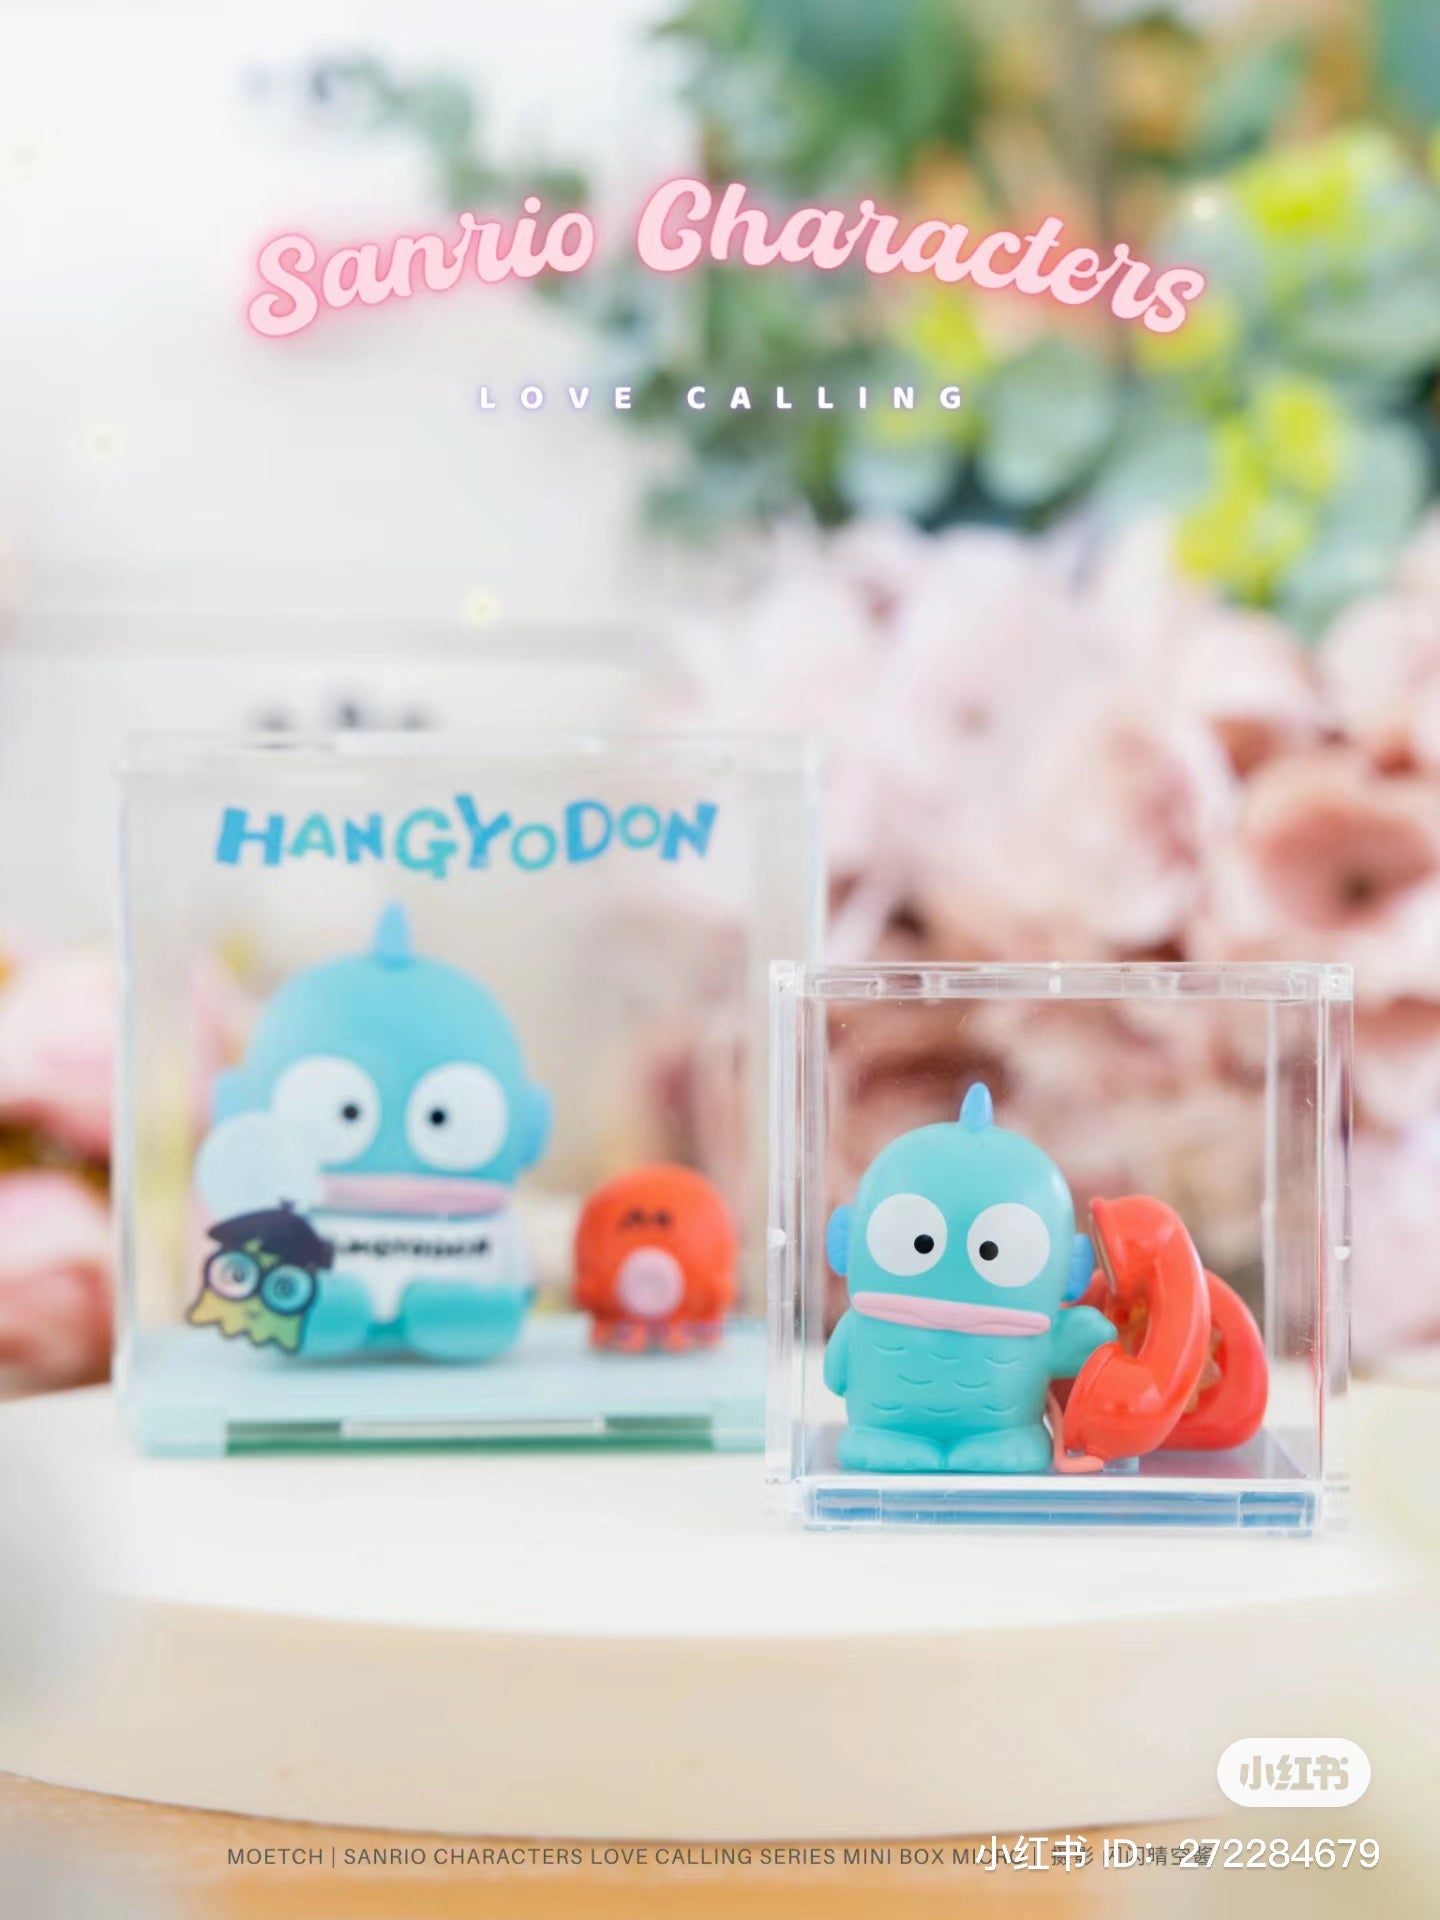 Sanrio characters Love Calling Series Mini Box Micro Blind Box Series featuring multiple toys in a clear box. Includes 8 designs and 1 secret.